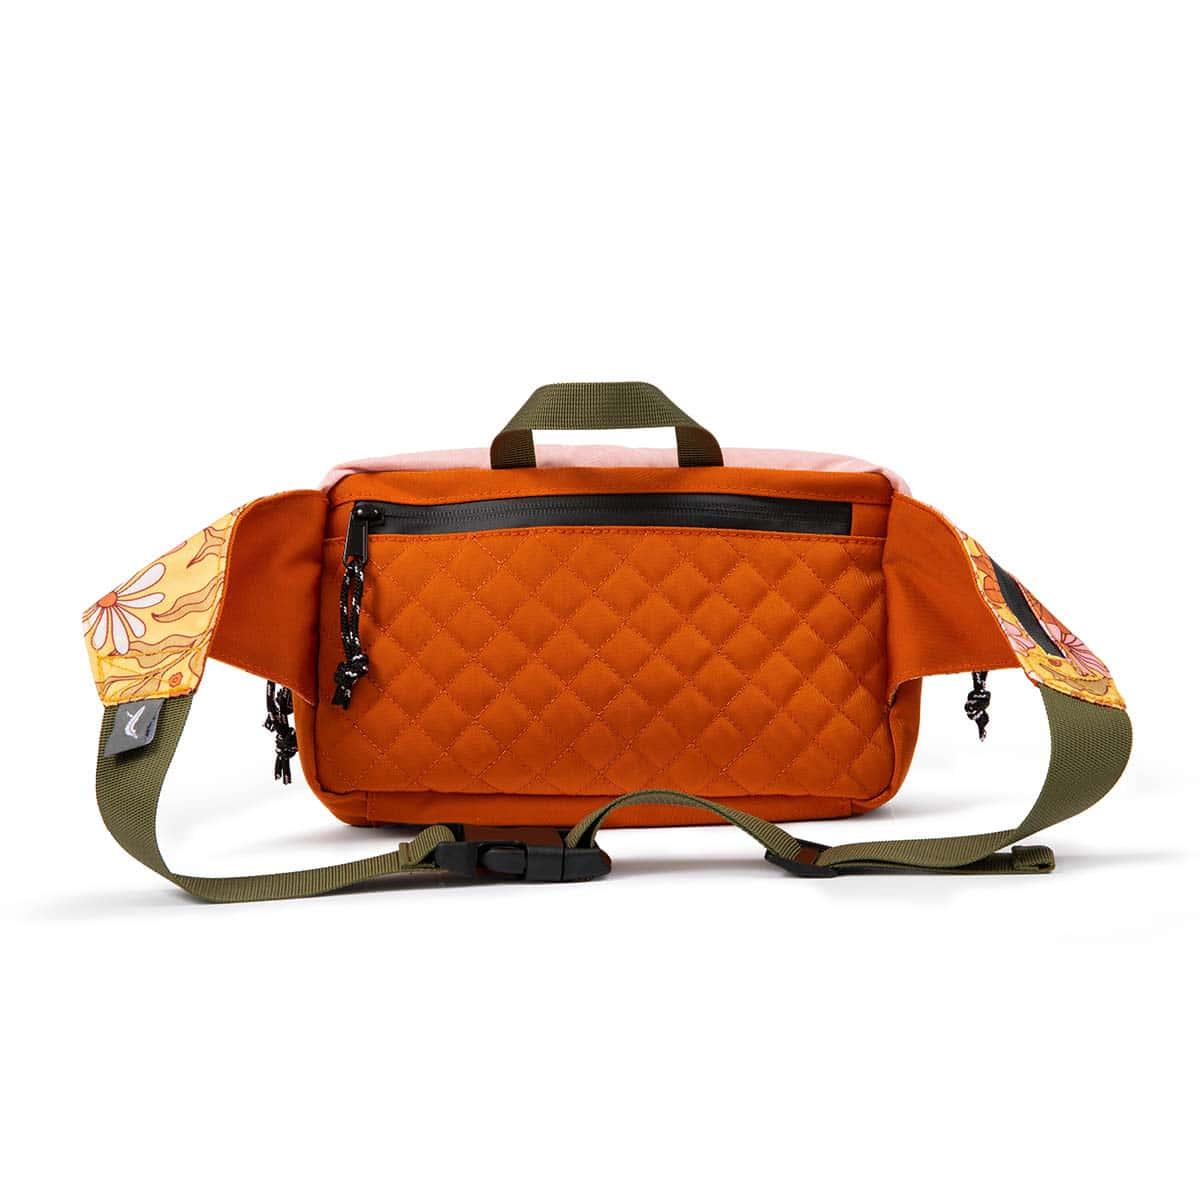 Peloton Belt Bag Fanny Pack Great Orange theory Fitness or spin